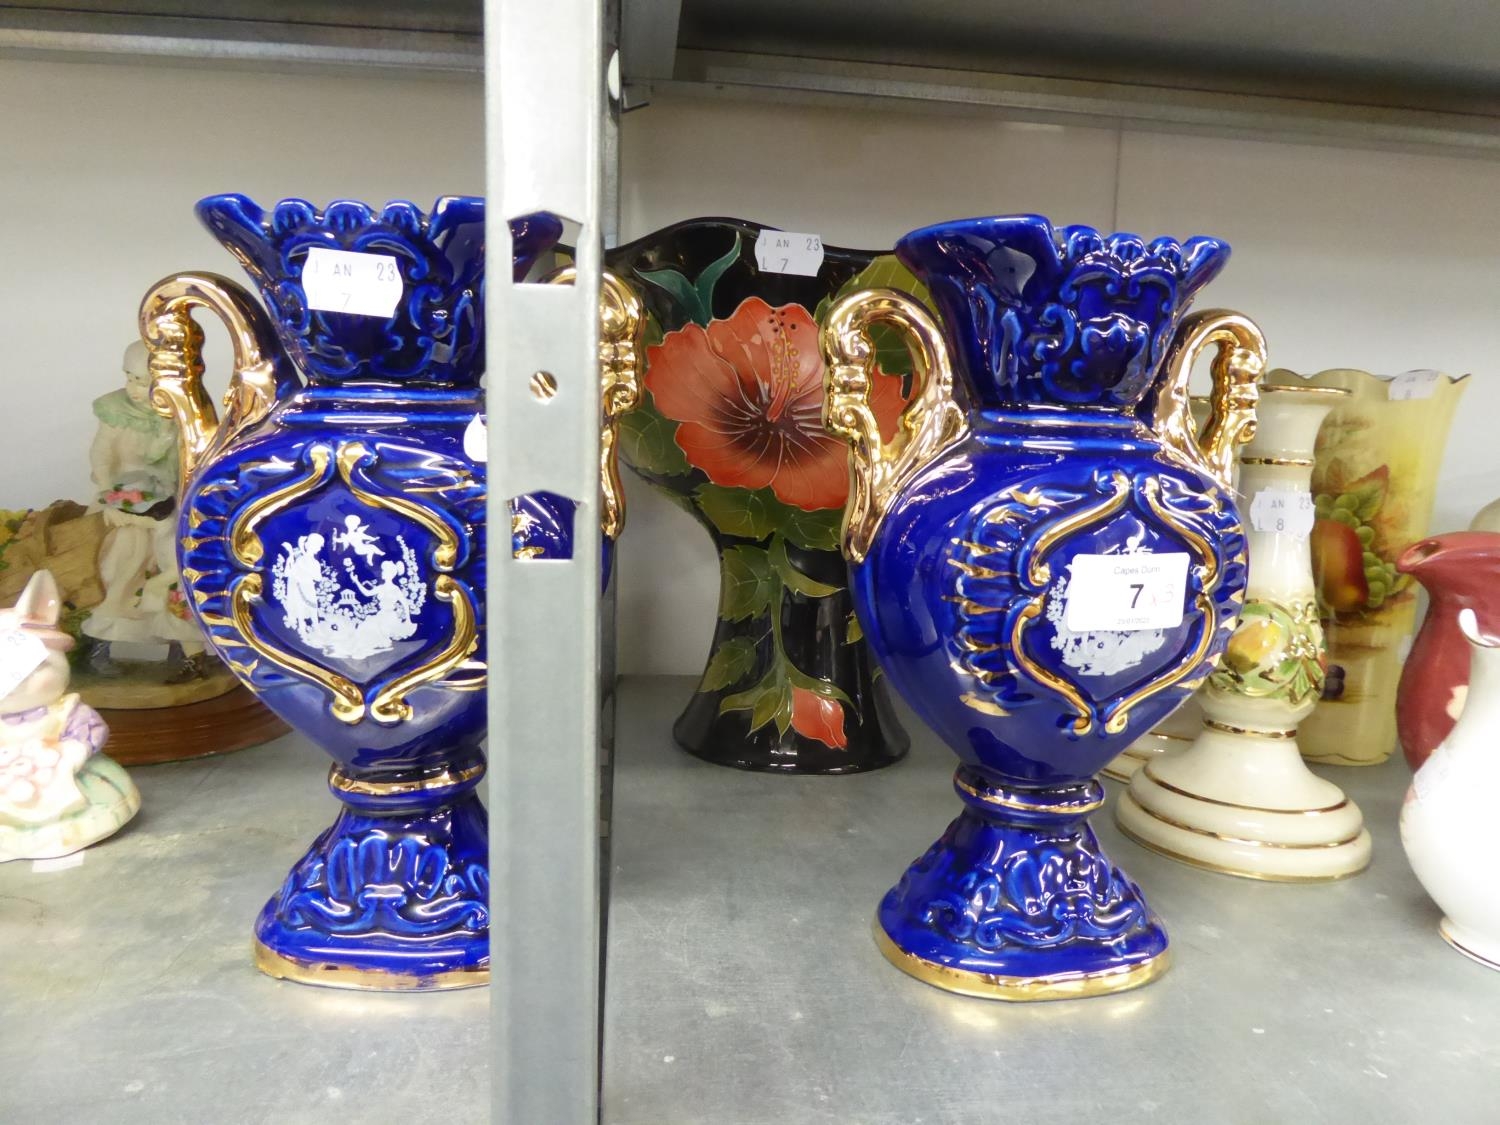 A PAIR OF ITALIAN BLUE AND GILT POTTERY TWO HANDLED VASES; A ‘BLUE SKY’ POTTERY MOORCROFT STYLE